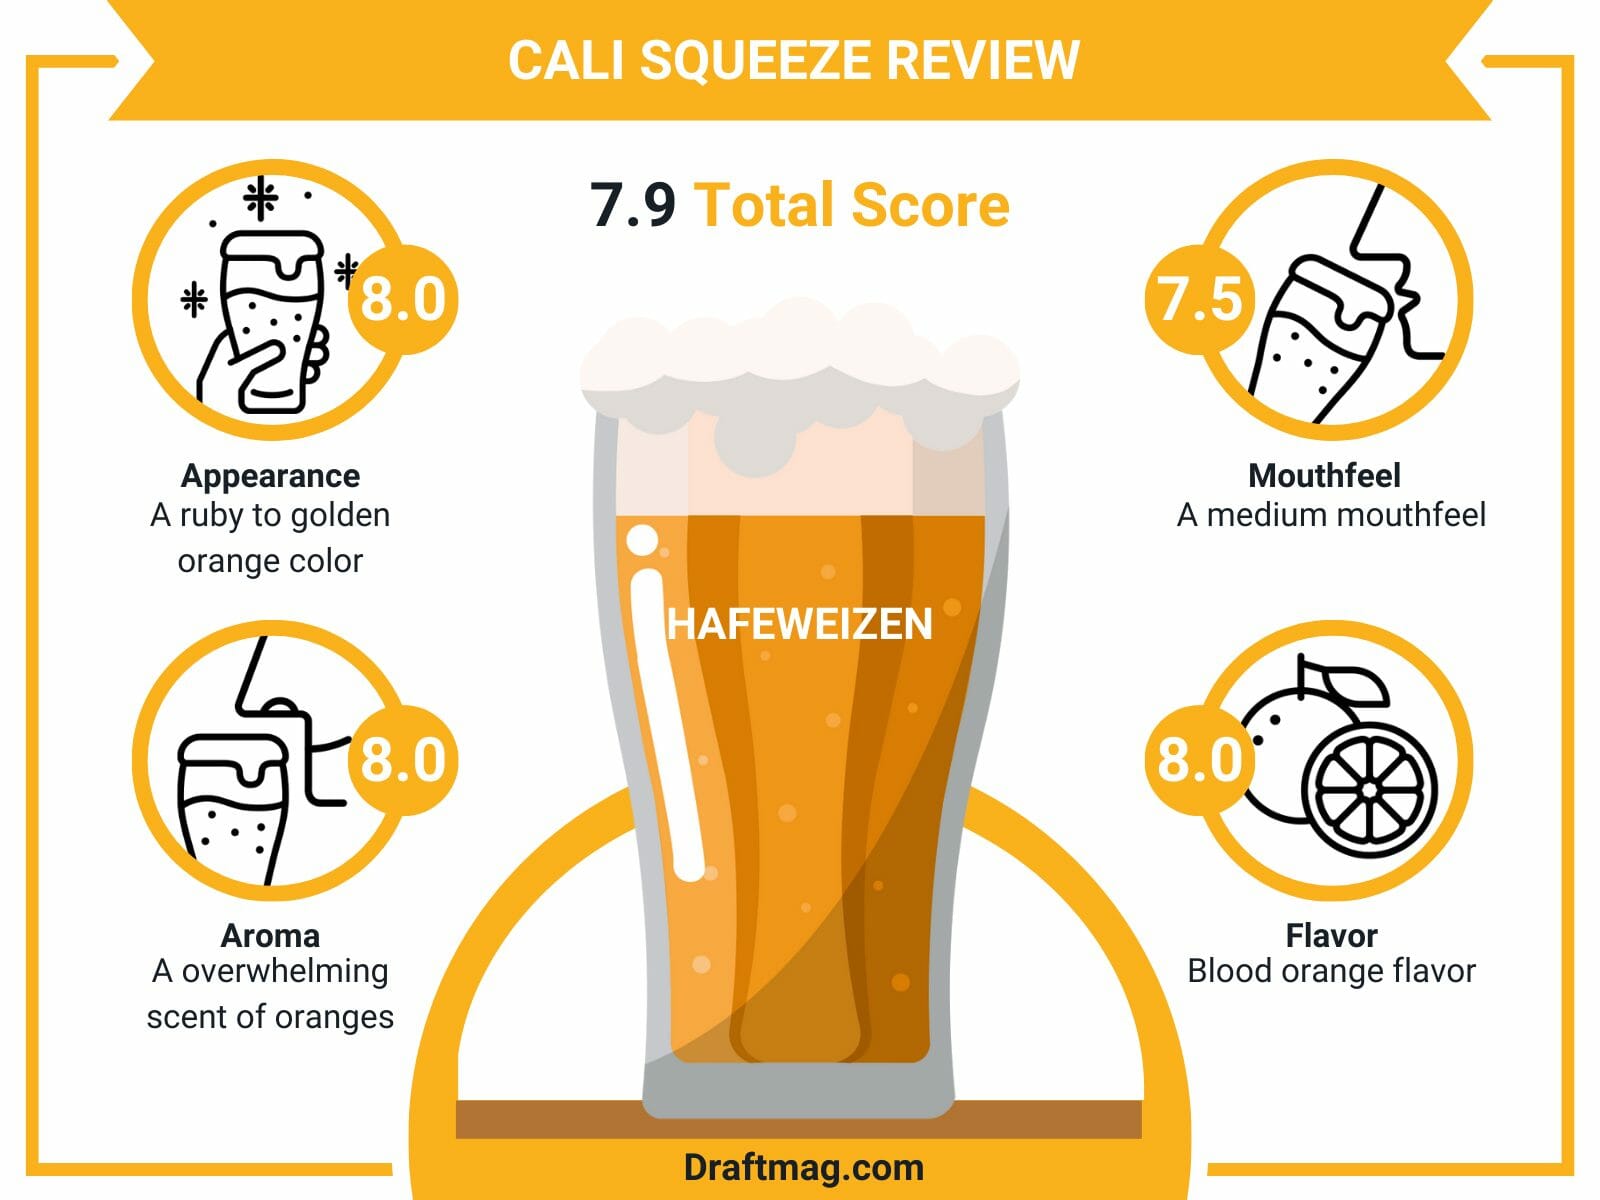 Cali squeeze review infographic